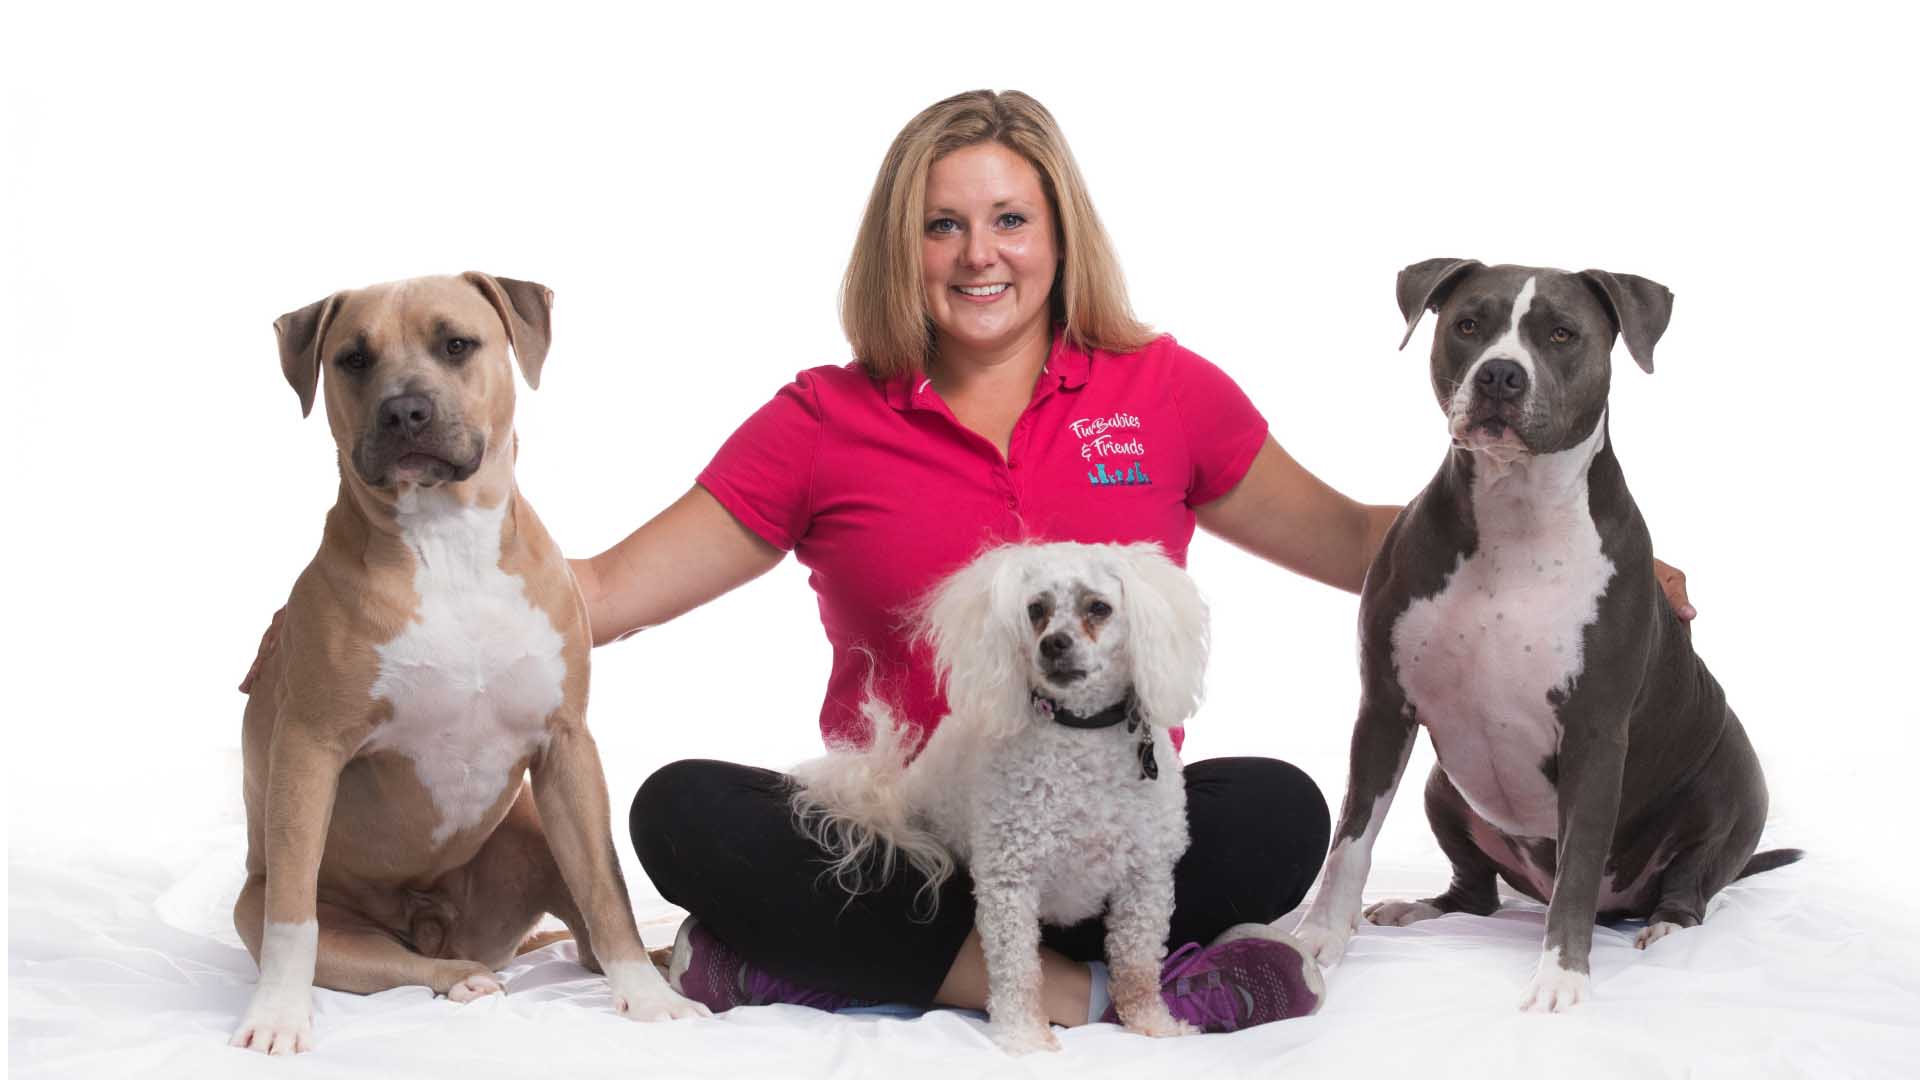 Kristie Halverson, owner of FurBabies & Friends in Glendale AZ, & a team of reliable & trustworthy pet sitters are here to help your furbaby.